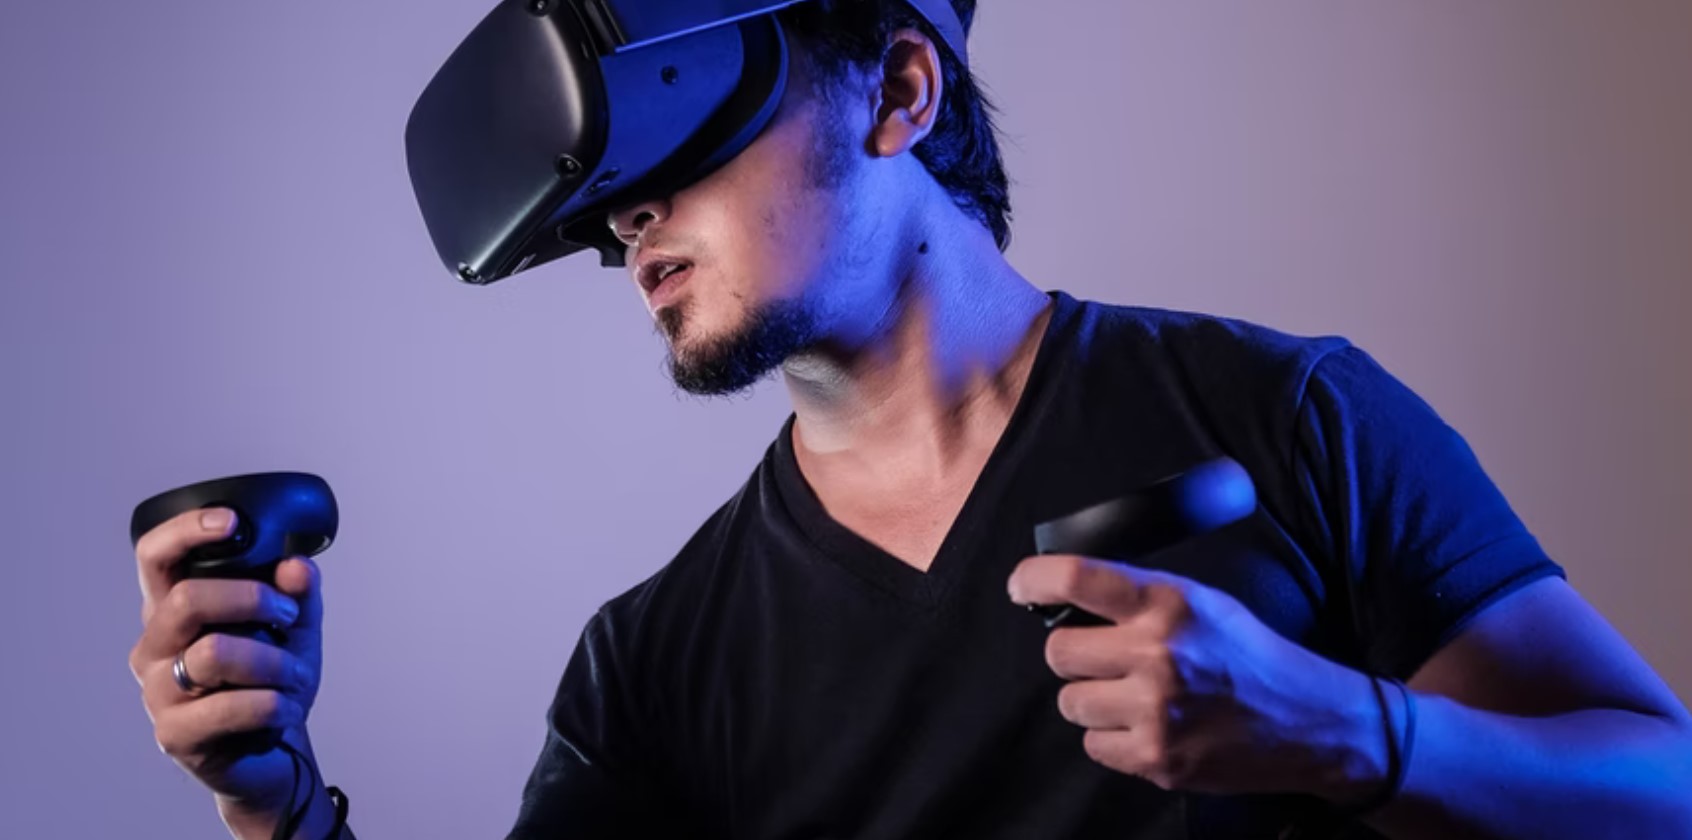 Man wearing VR headset and holding two controllers